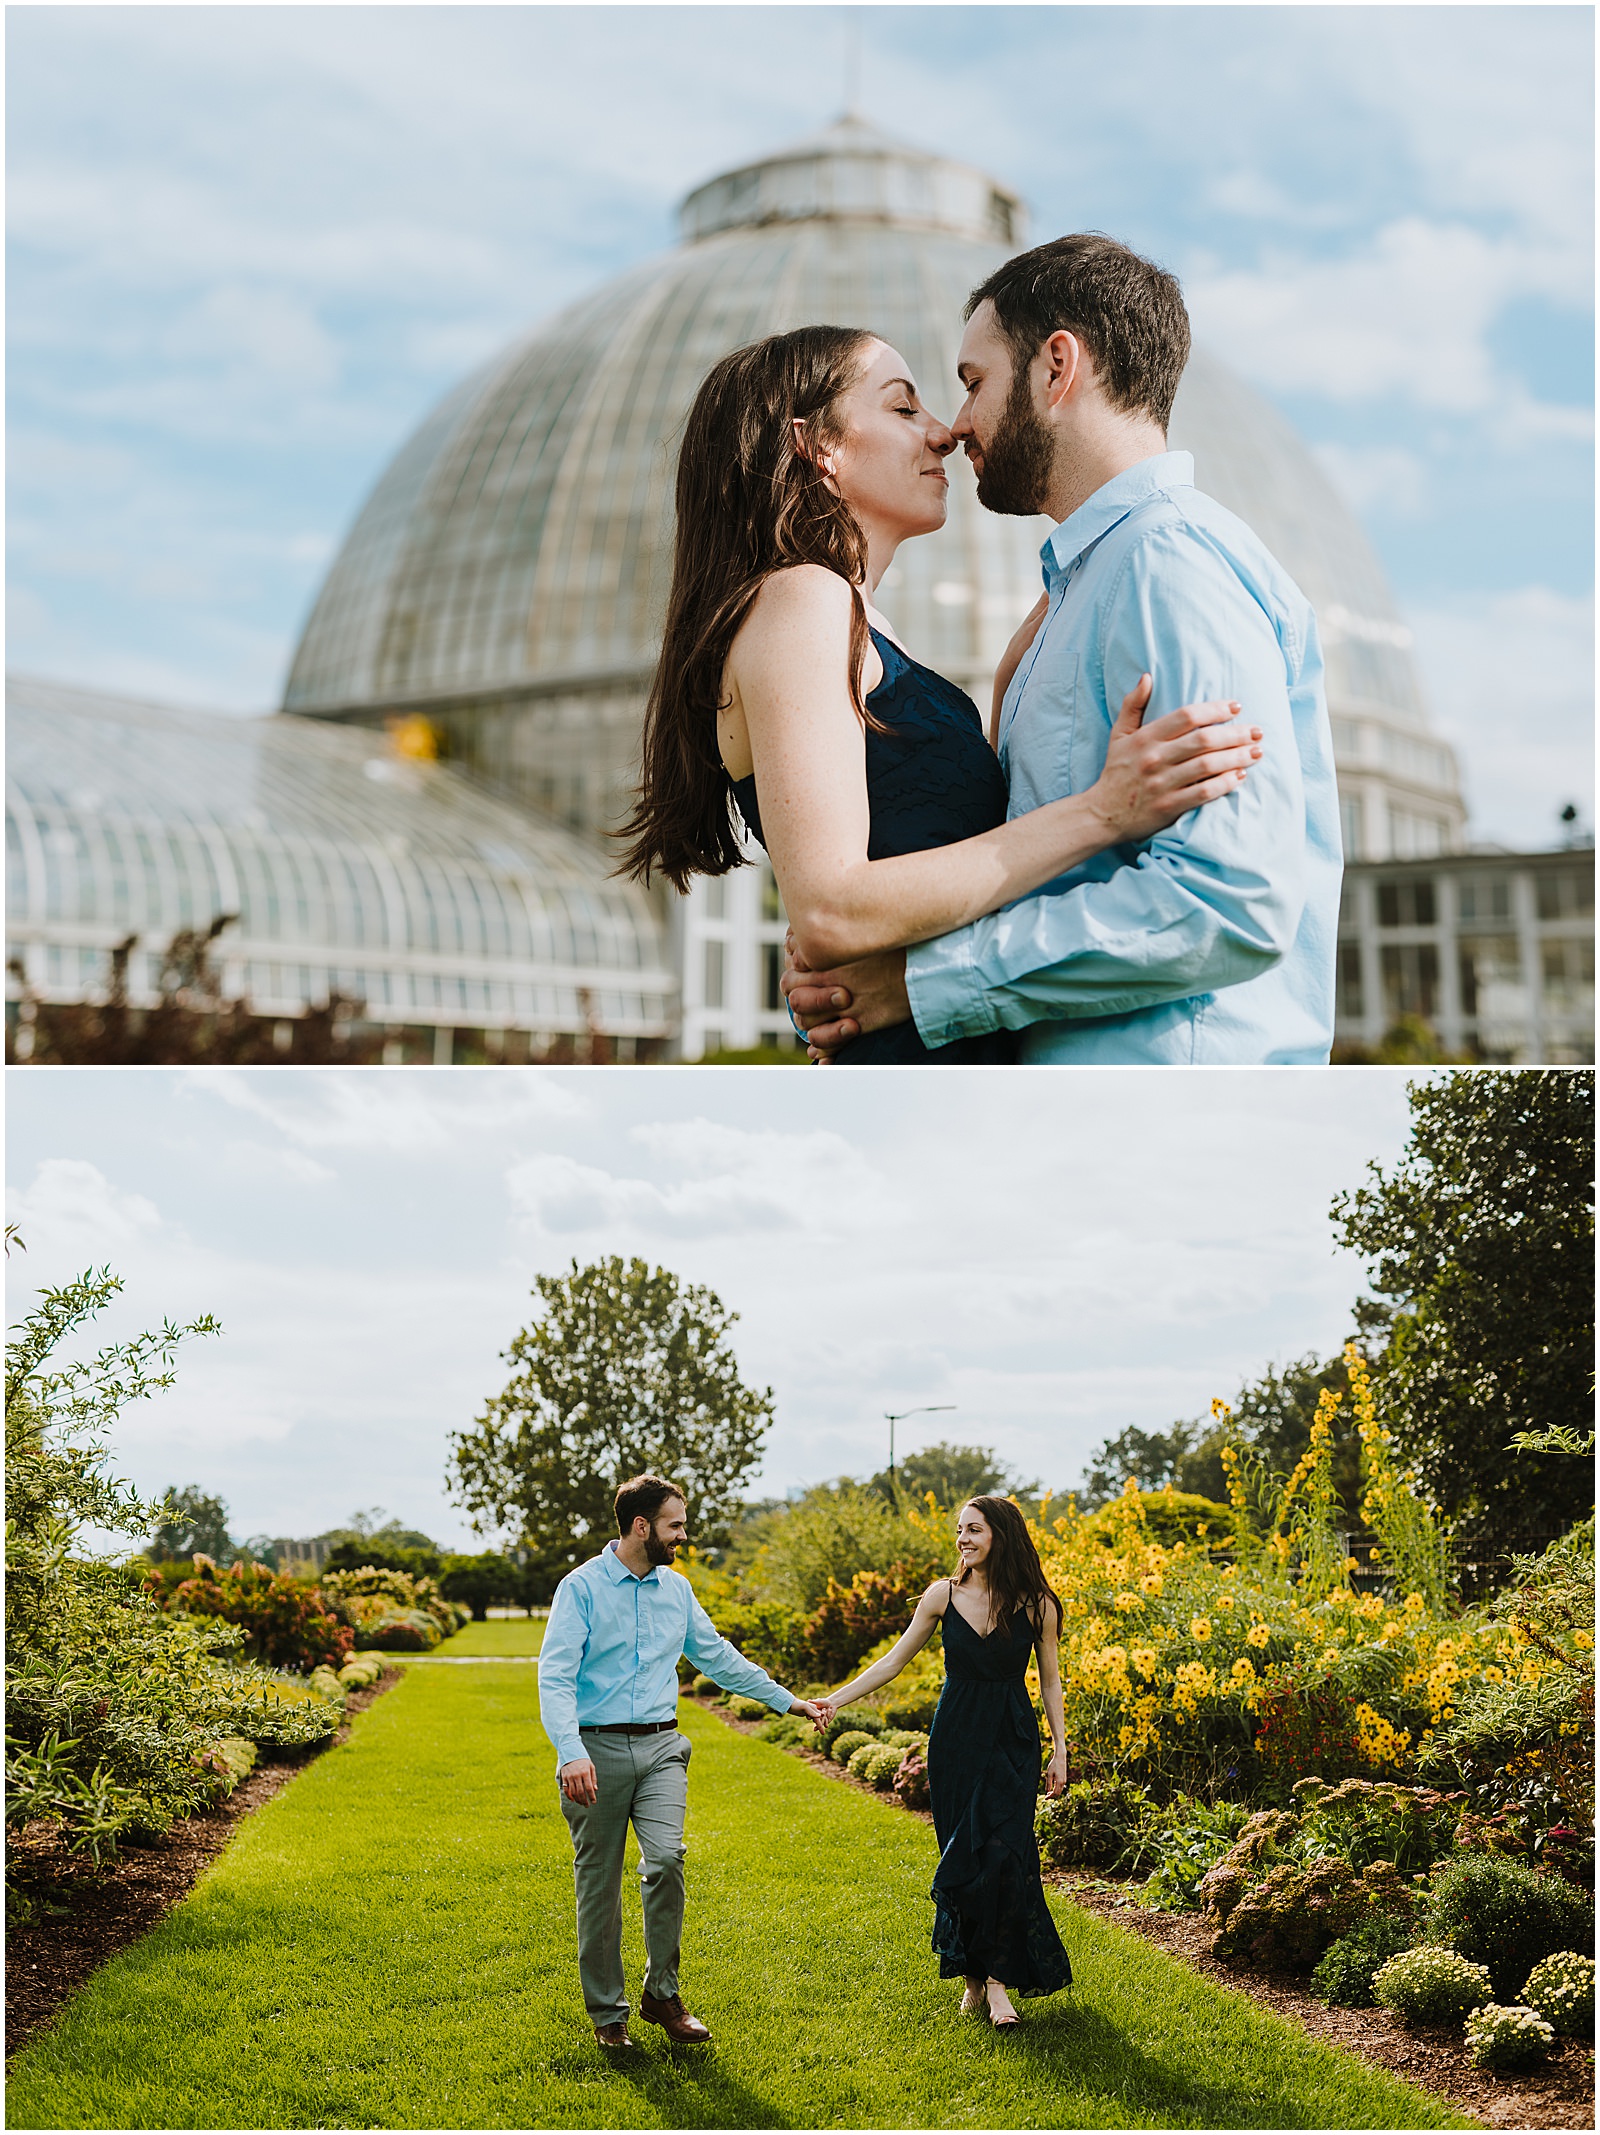 Belle Isle Conservatory Engagement Session